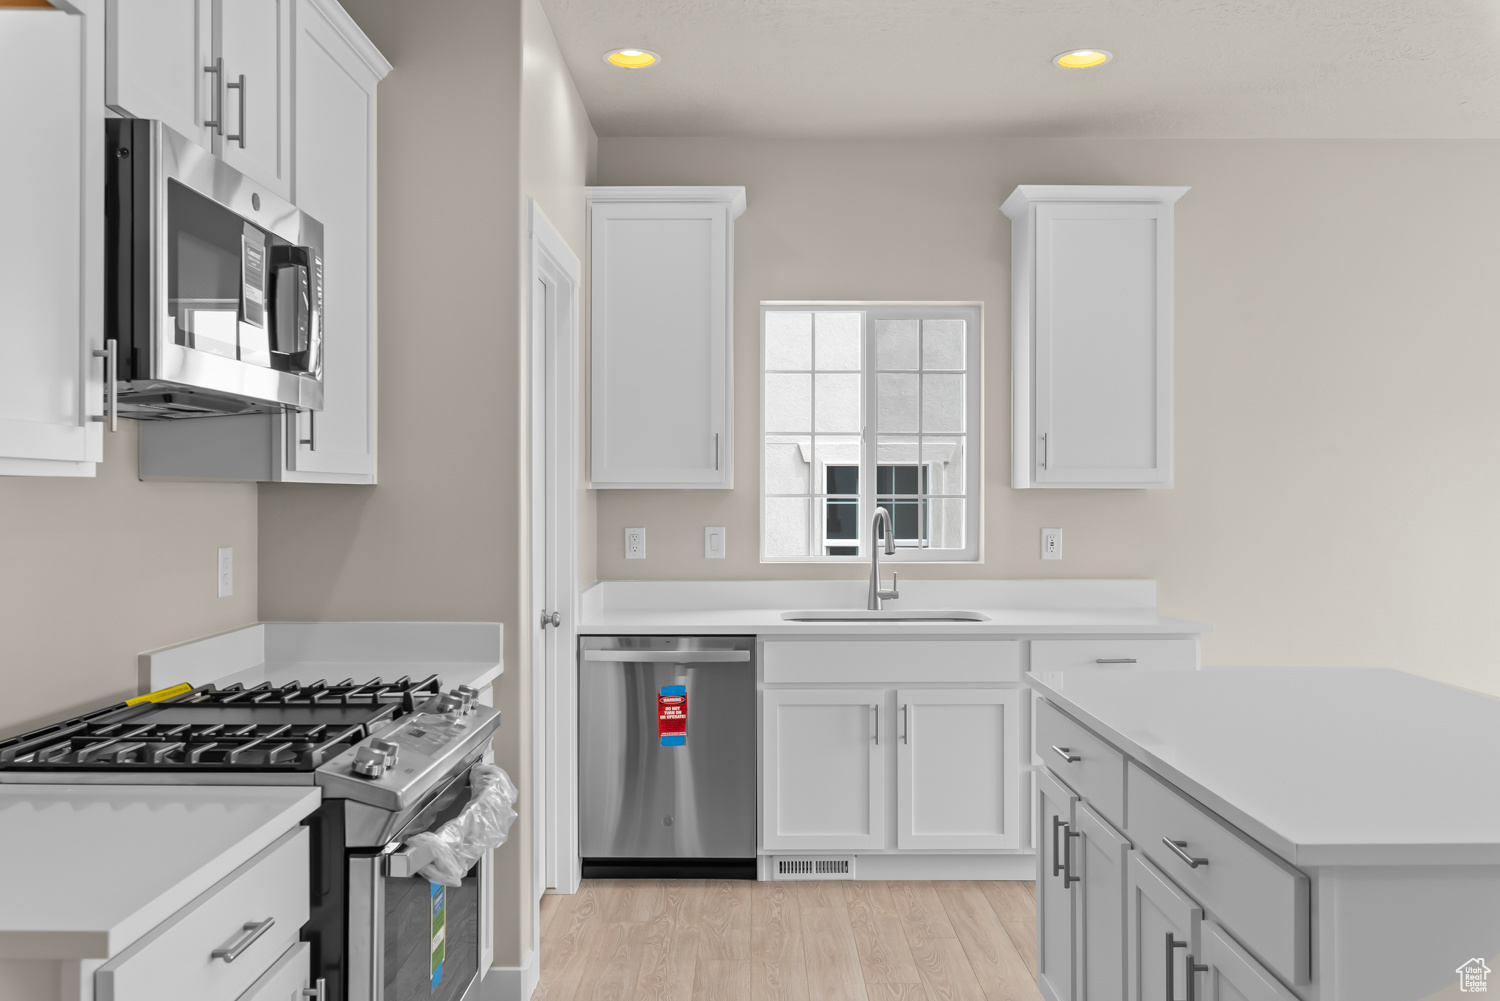 Kitchen featuring white cabinets, sink, appliances with stainless steel finishes, and light wood-type flooring